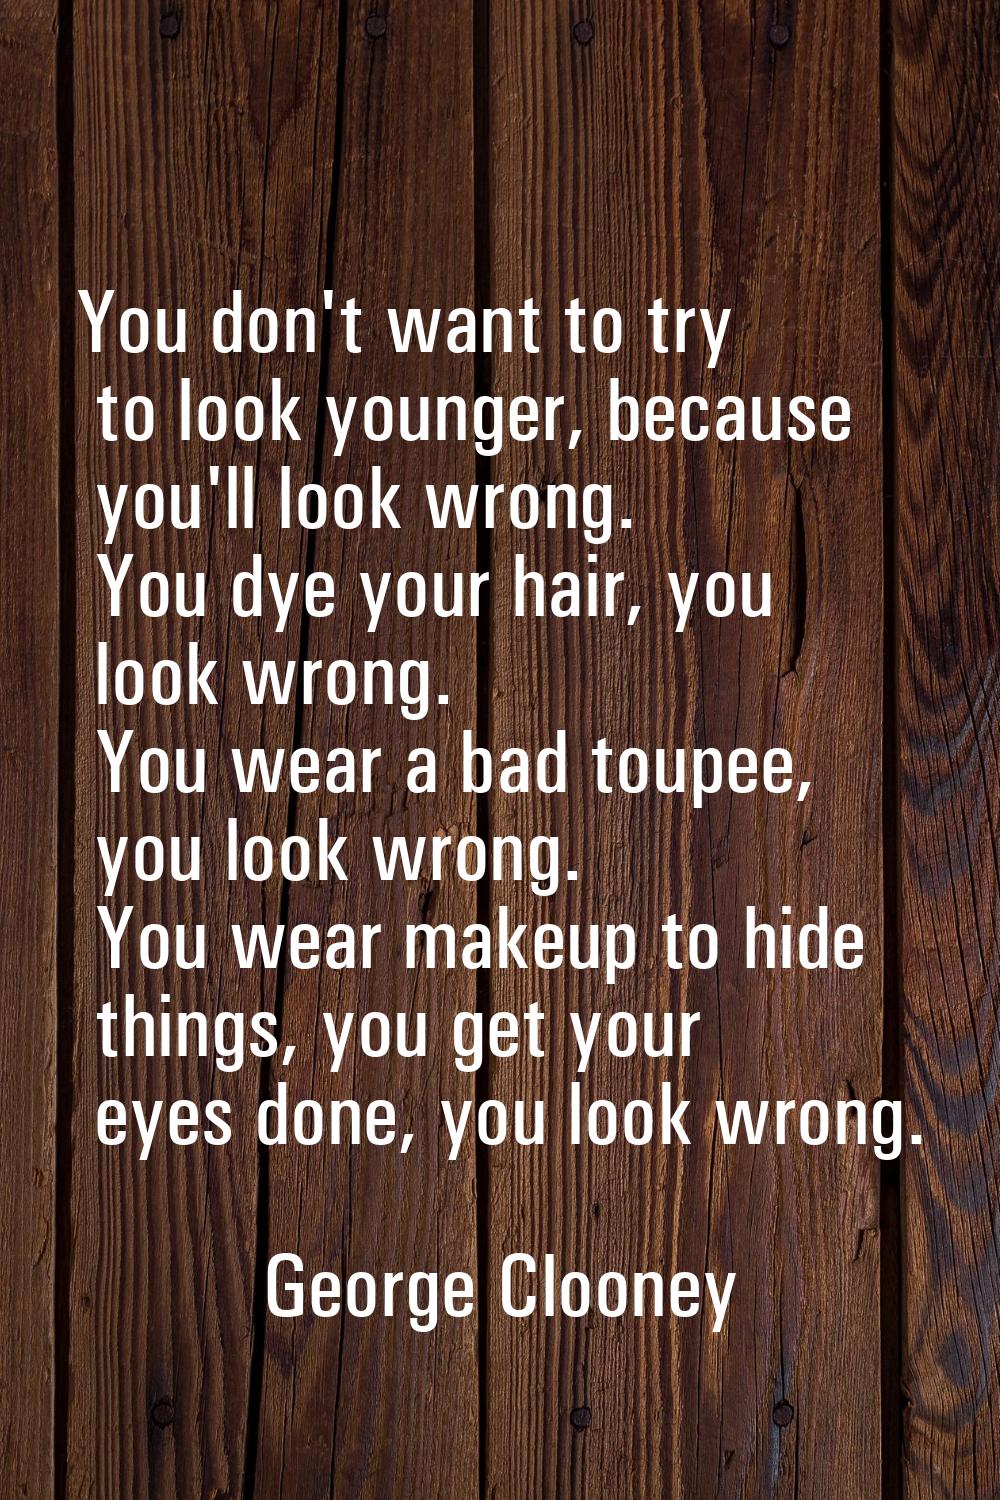 You don't want to try to look younger, because you'll look wrong. You dye your hair, you look wrong